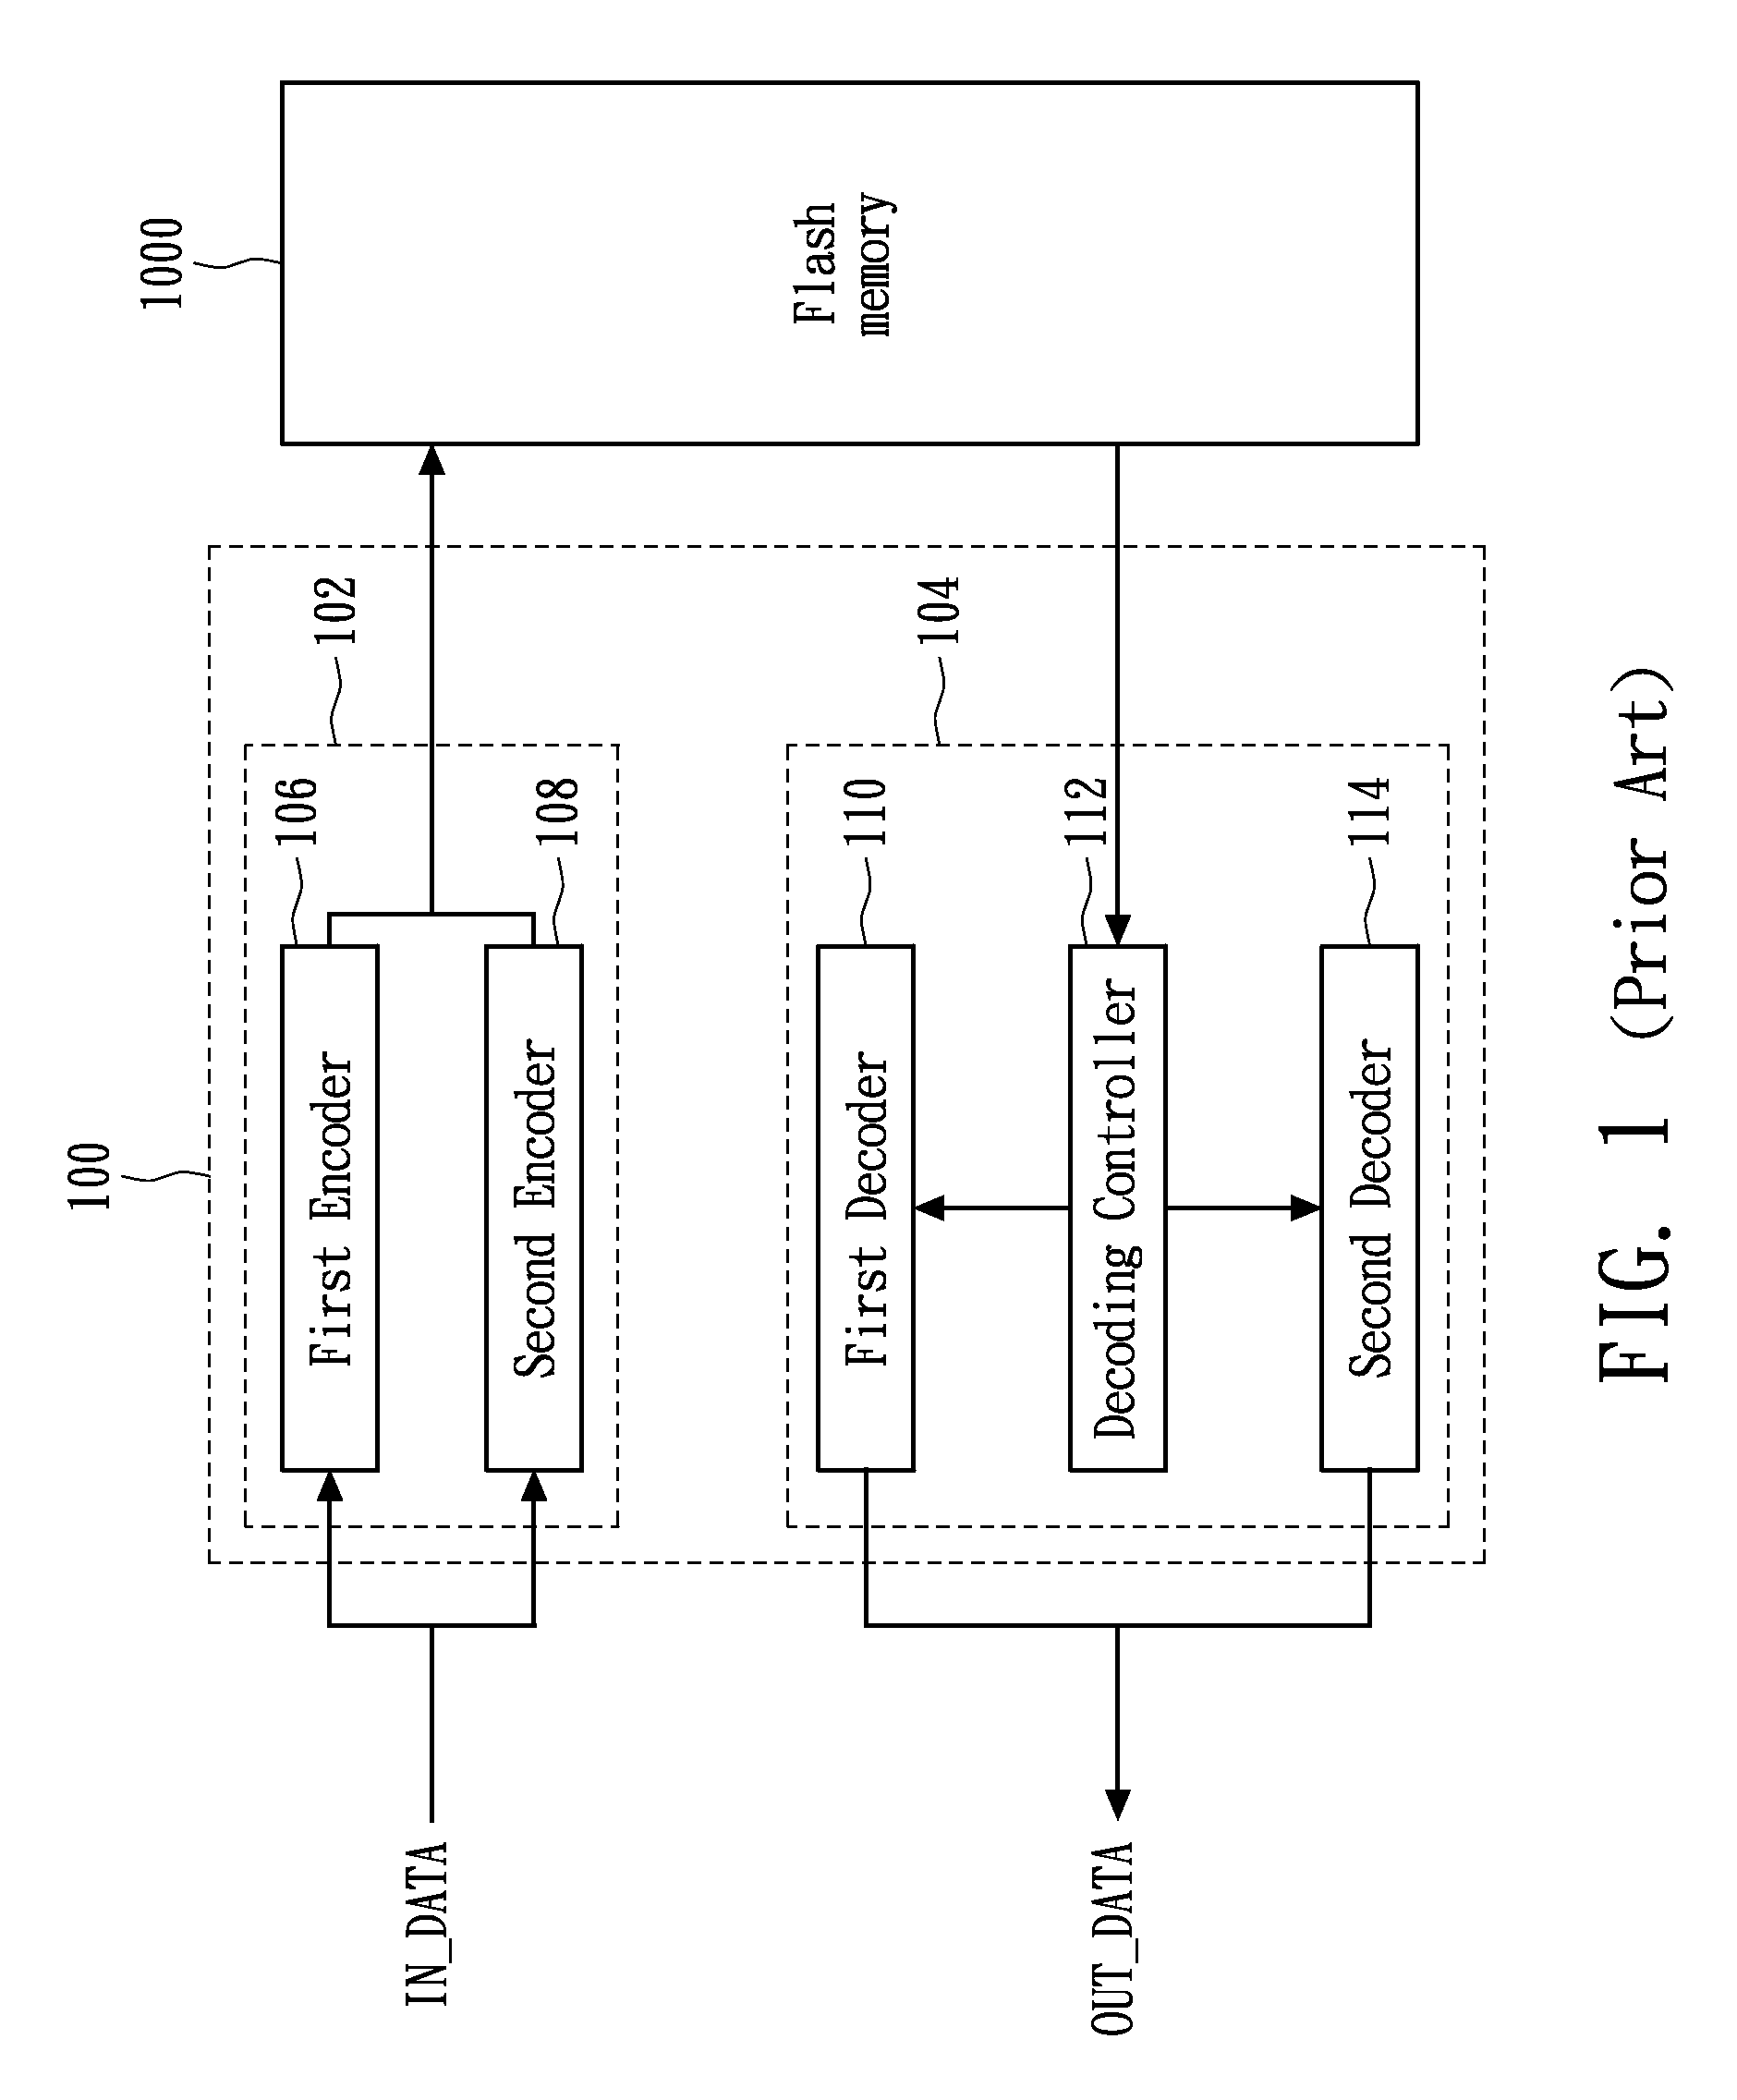 Flash memory controller, error correction code controller therein, and the methods and systems thereof